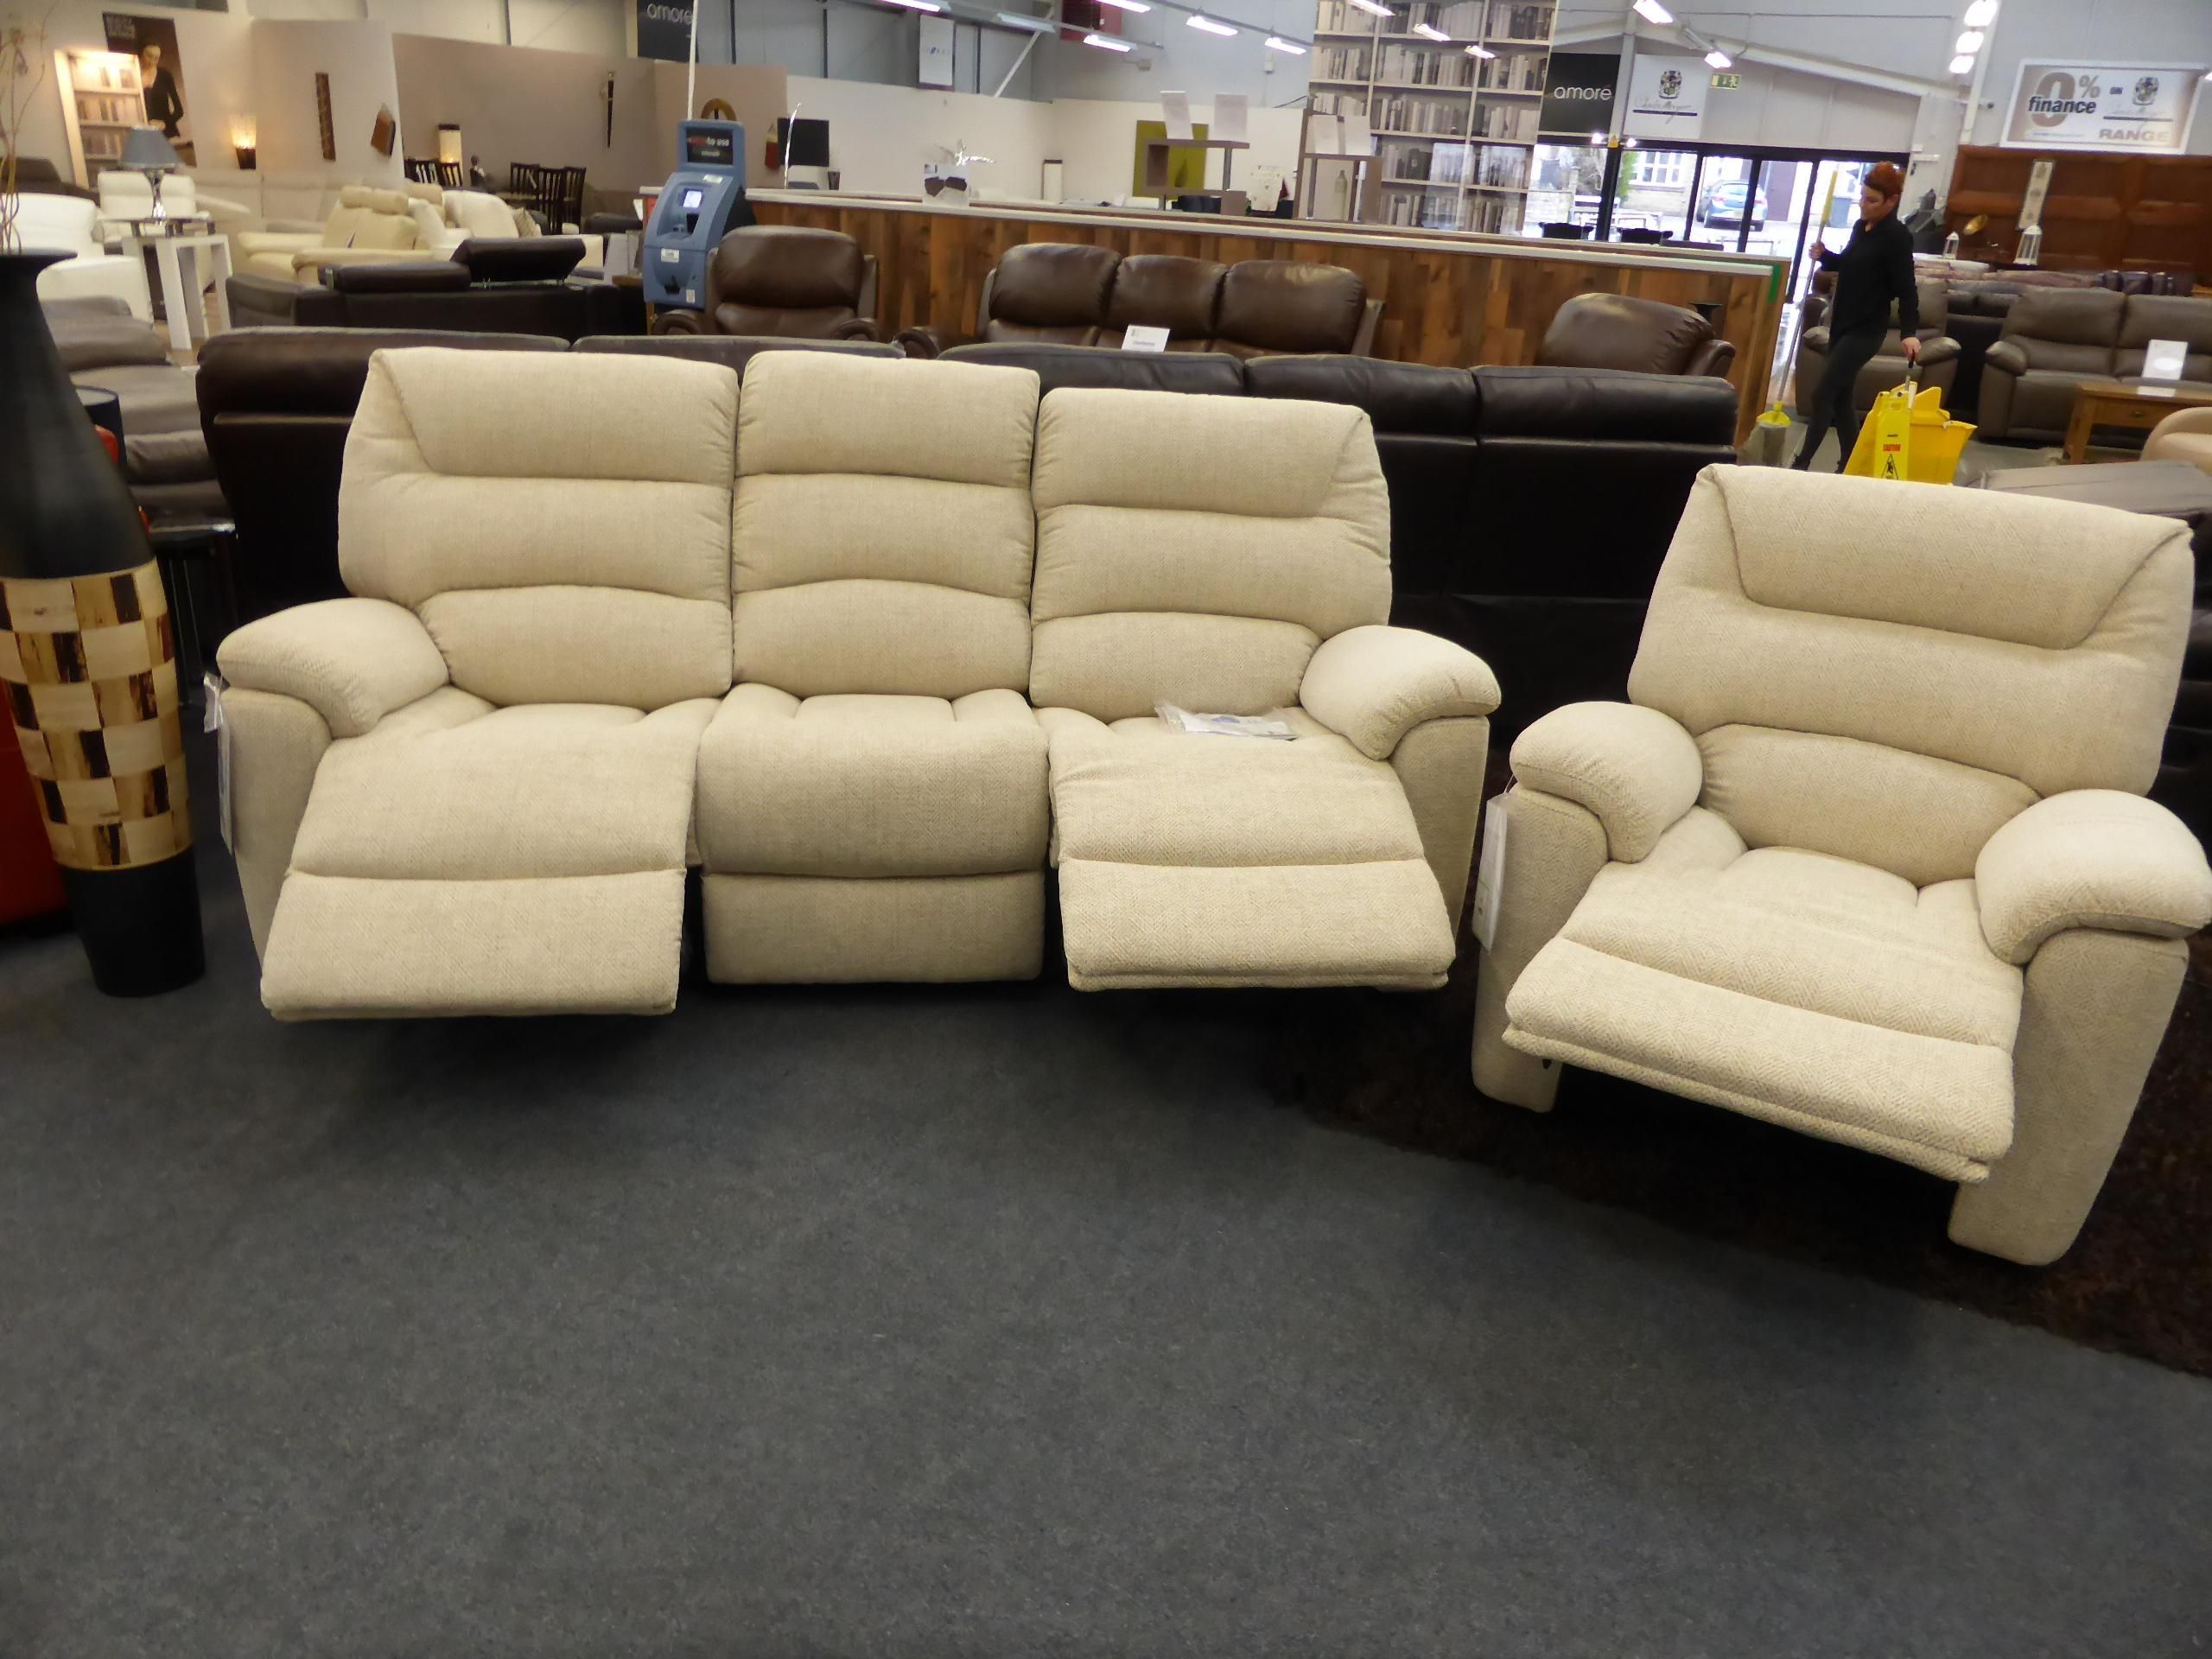 Lazboy Sofas And Beds | Furnimax Brands Outlet In Lazy Boy Manhattan Sofas (View 1 of 21)